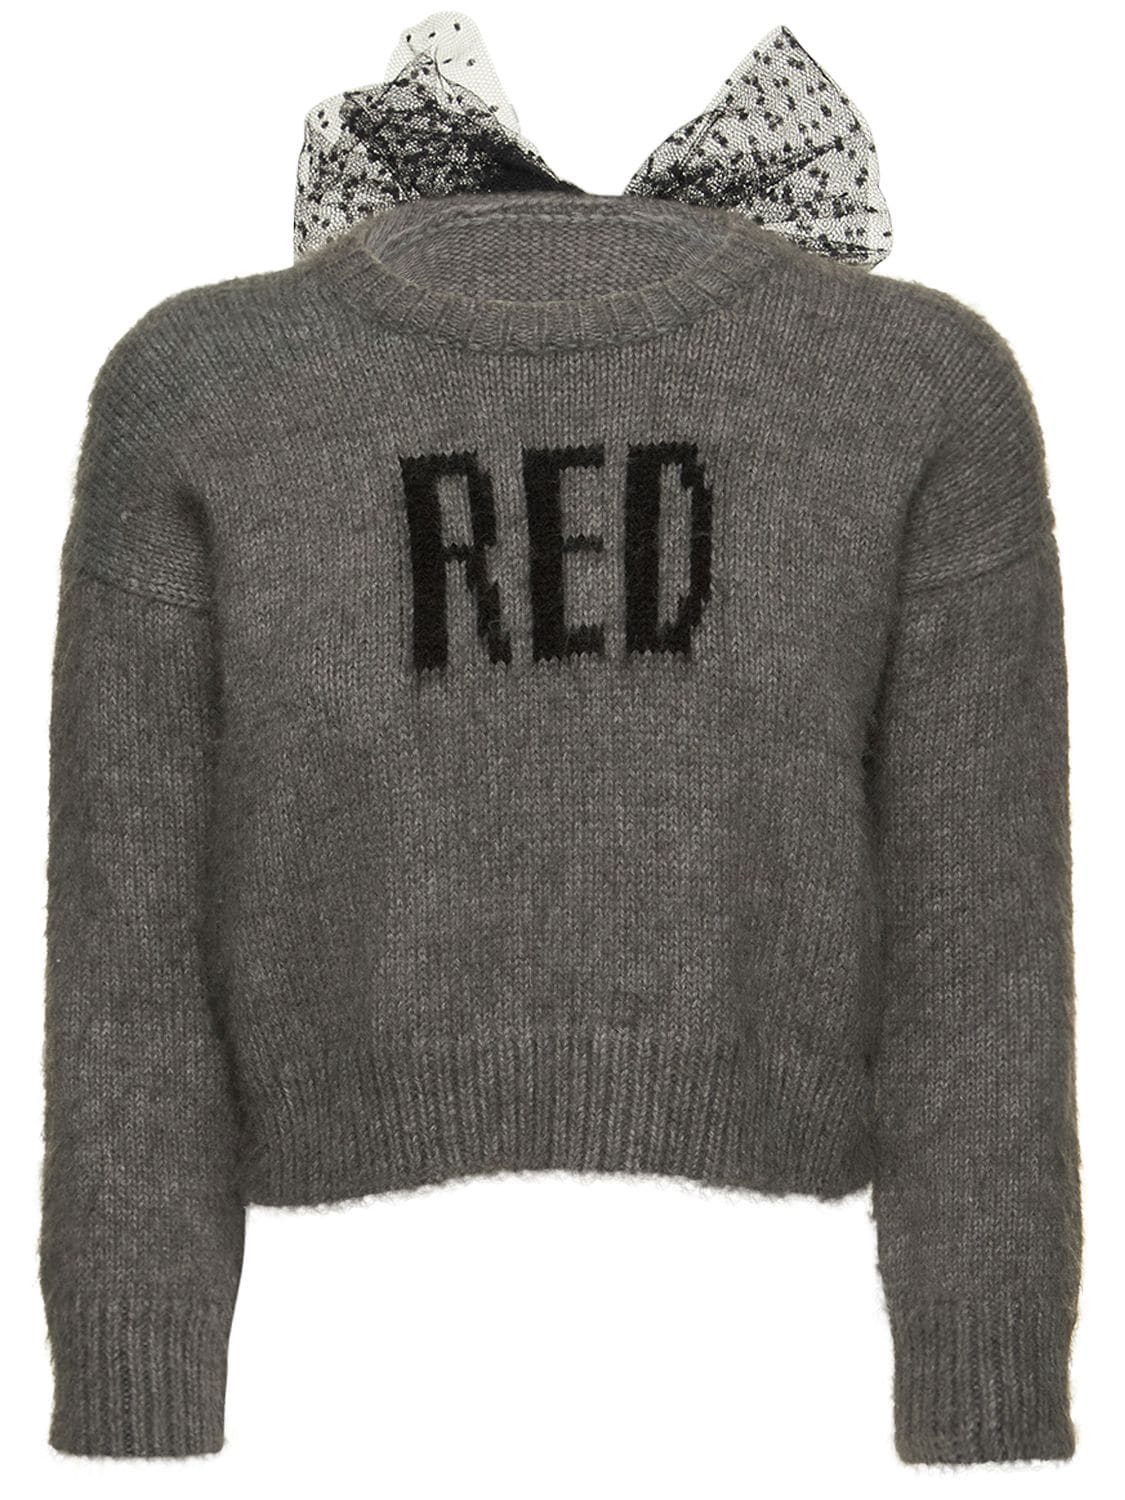 RED VALENTINO MOHAIR BLEND KNIT SWEATER W/ BOW